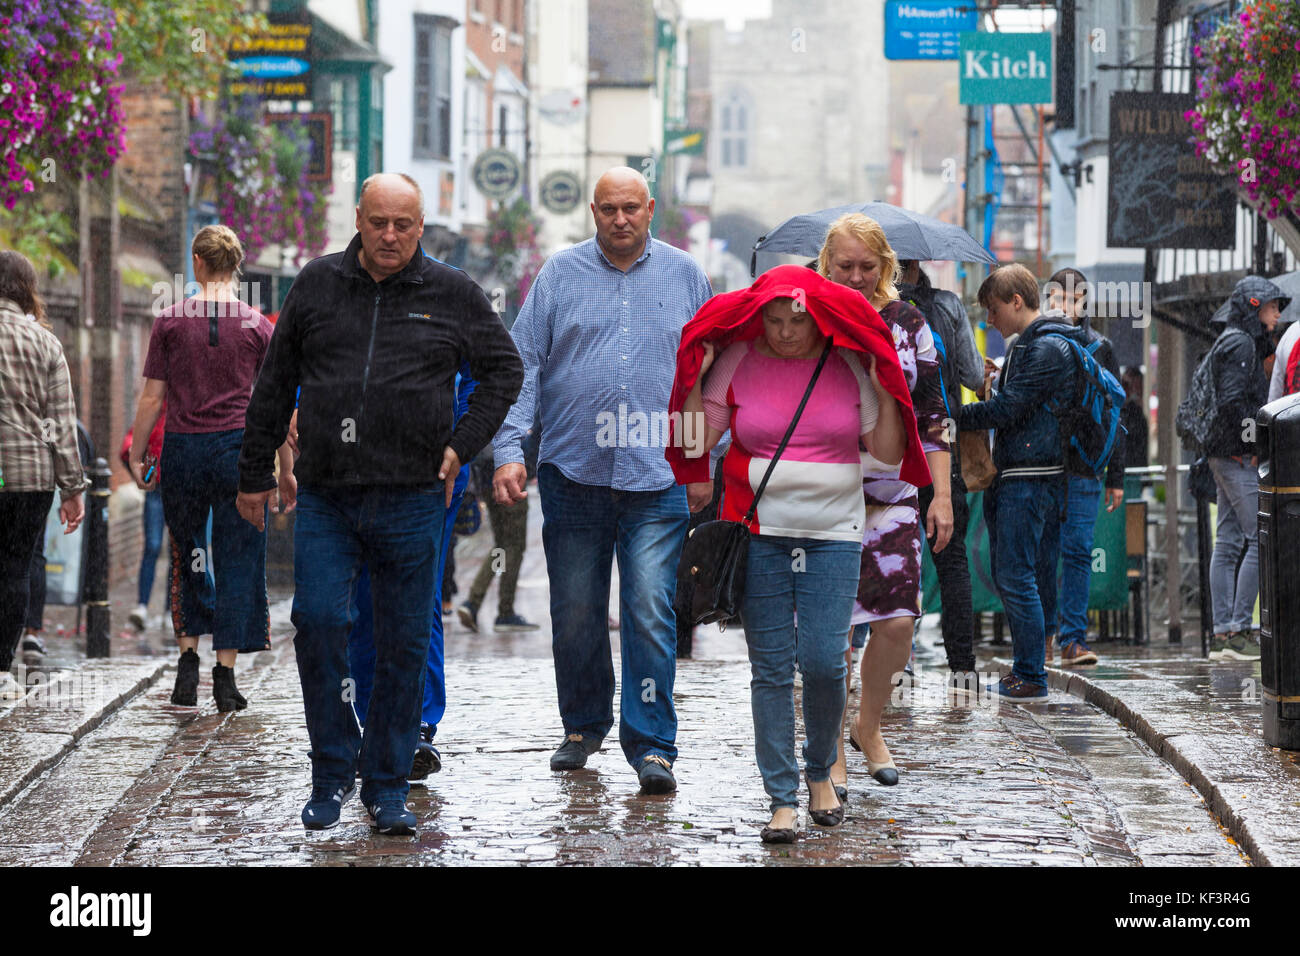 Canterbury, Kent, UK. 29th September 2017. Group of people walk around the town centre getting soaked on a wet and rainy day. uk downpour Stock Photo